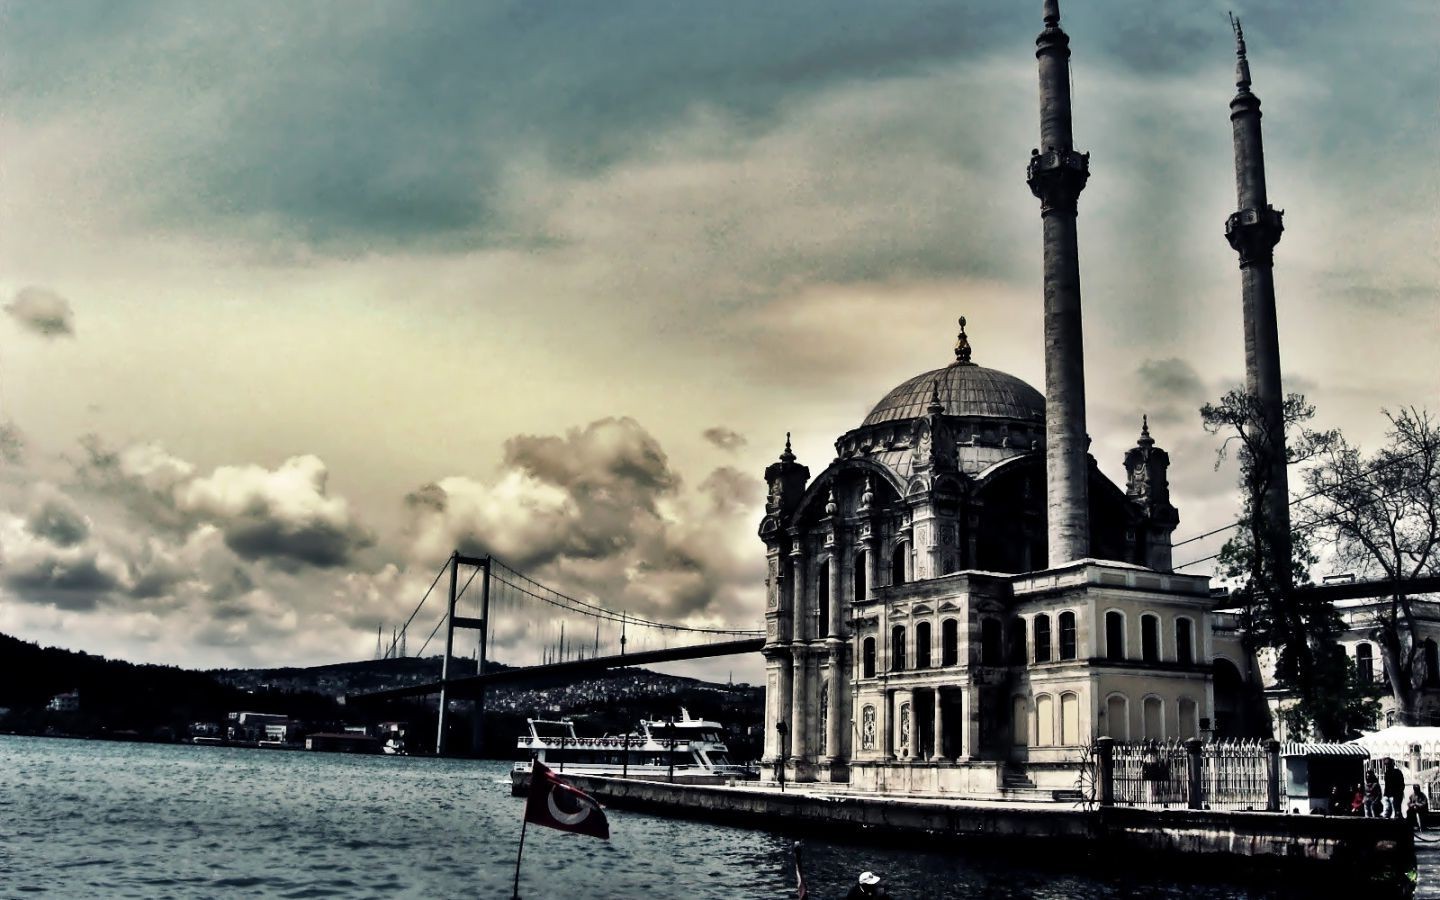 Turkey, HDR, Clouds, Sky, Mosques, Architecture, Building, Bridge, Old building, Water, Ortaköy Mosque Wallpaper